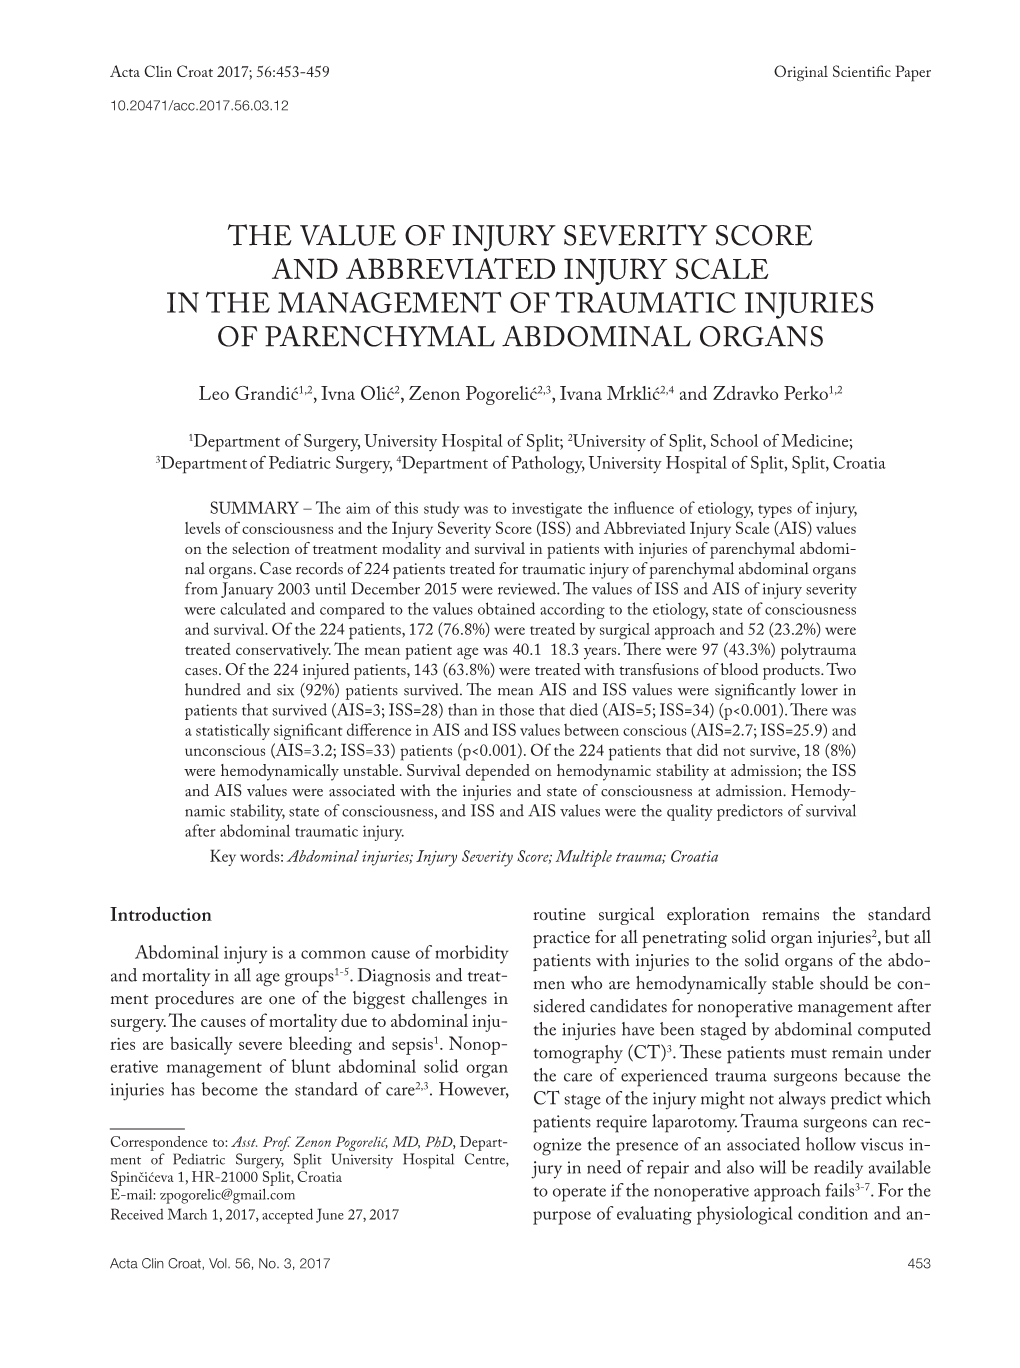 The Value of Injury Severity Score and Abbreviated Injury Scale in the Management of Traumatic Injuries of Parenchymal Abdominal Organs